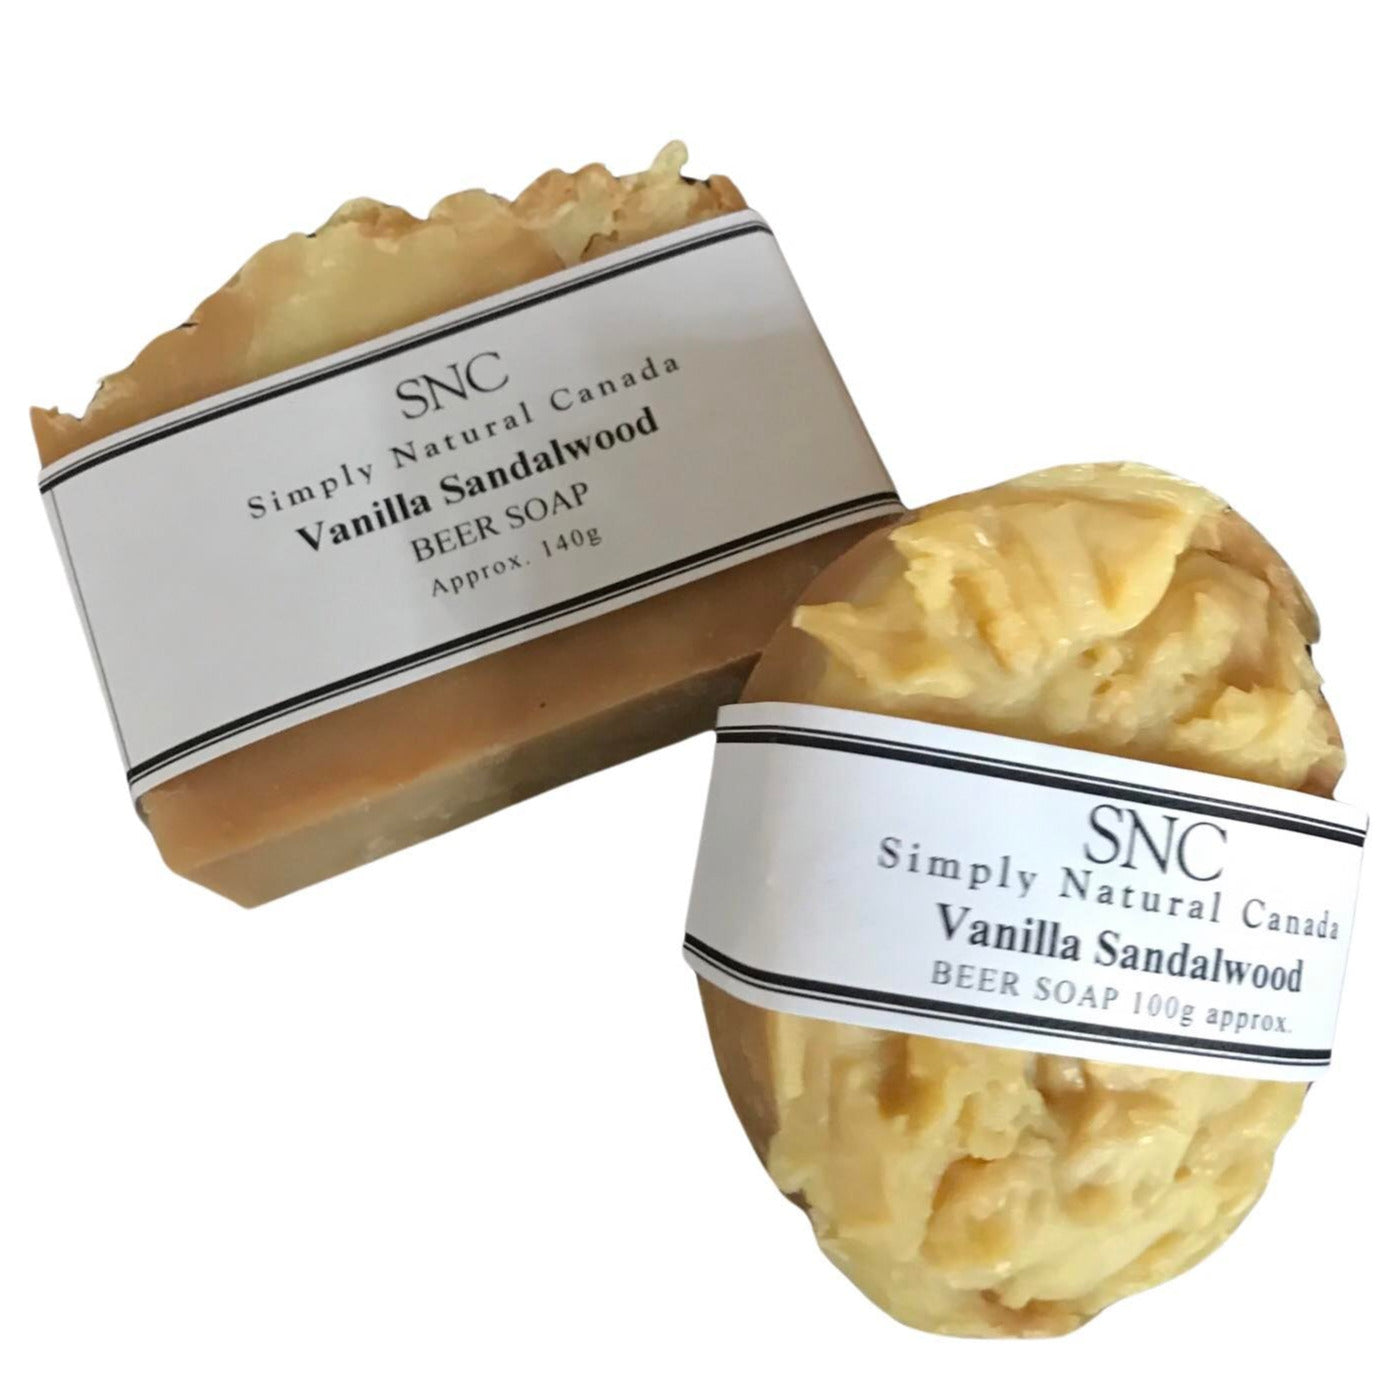 Vanilla sandalwood beer soaps handcrafted in Canada with local craft beer by Simply Natural Canada